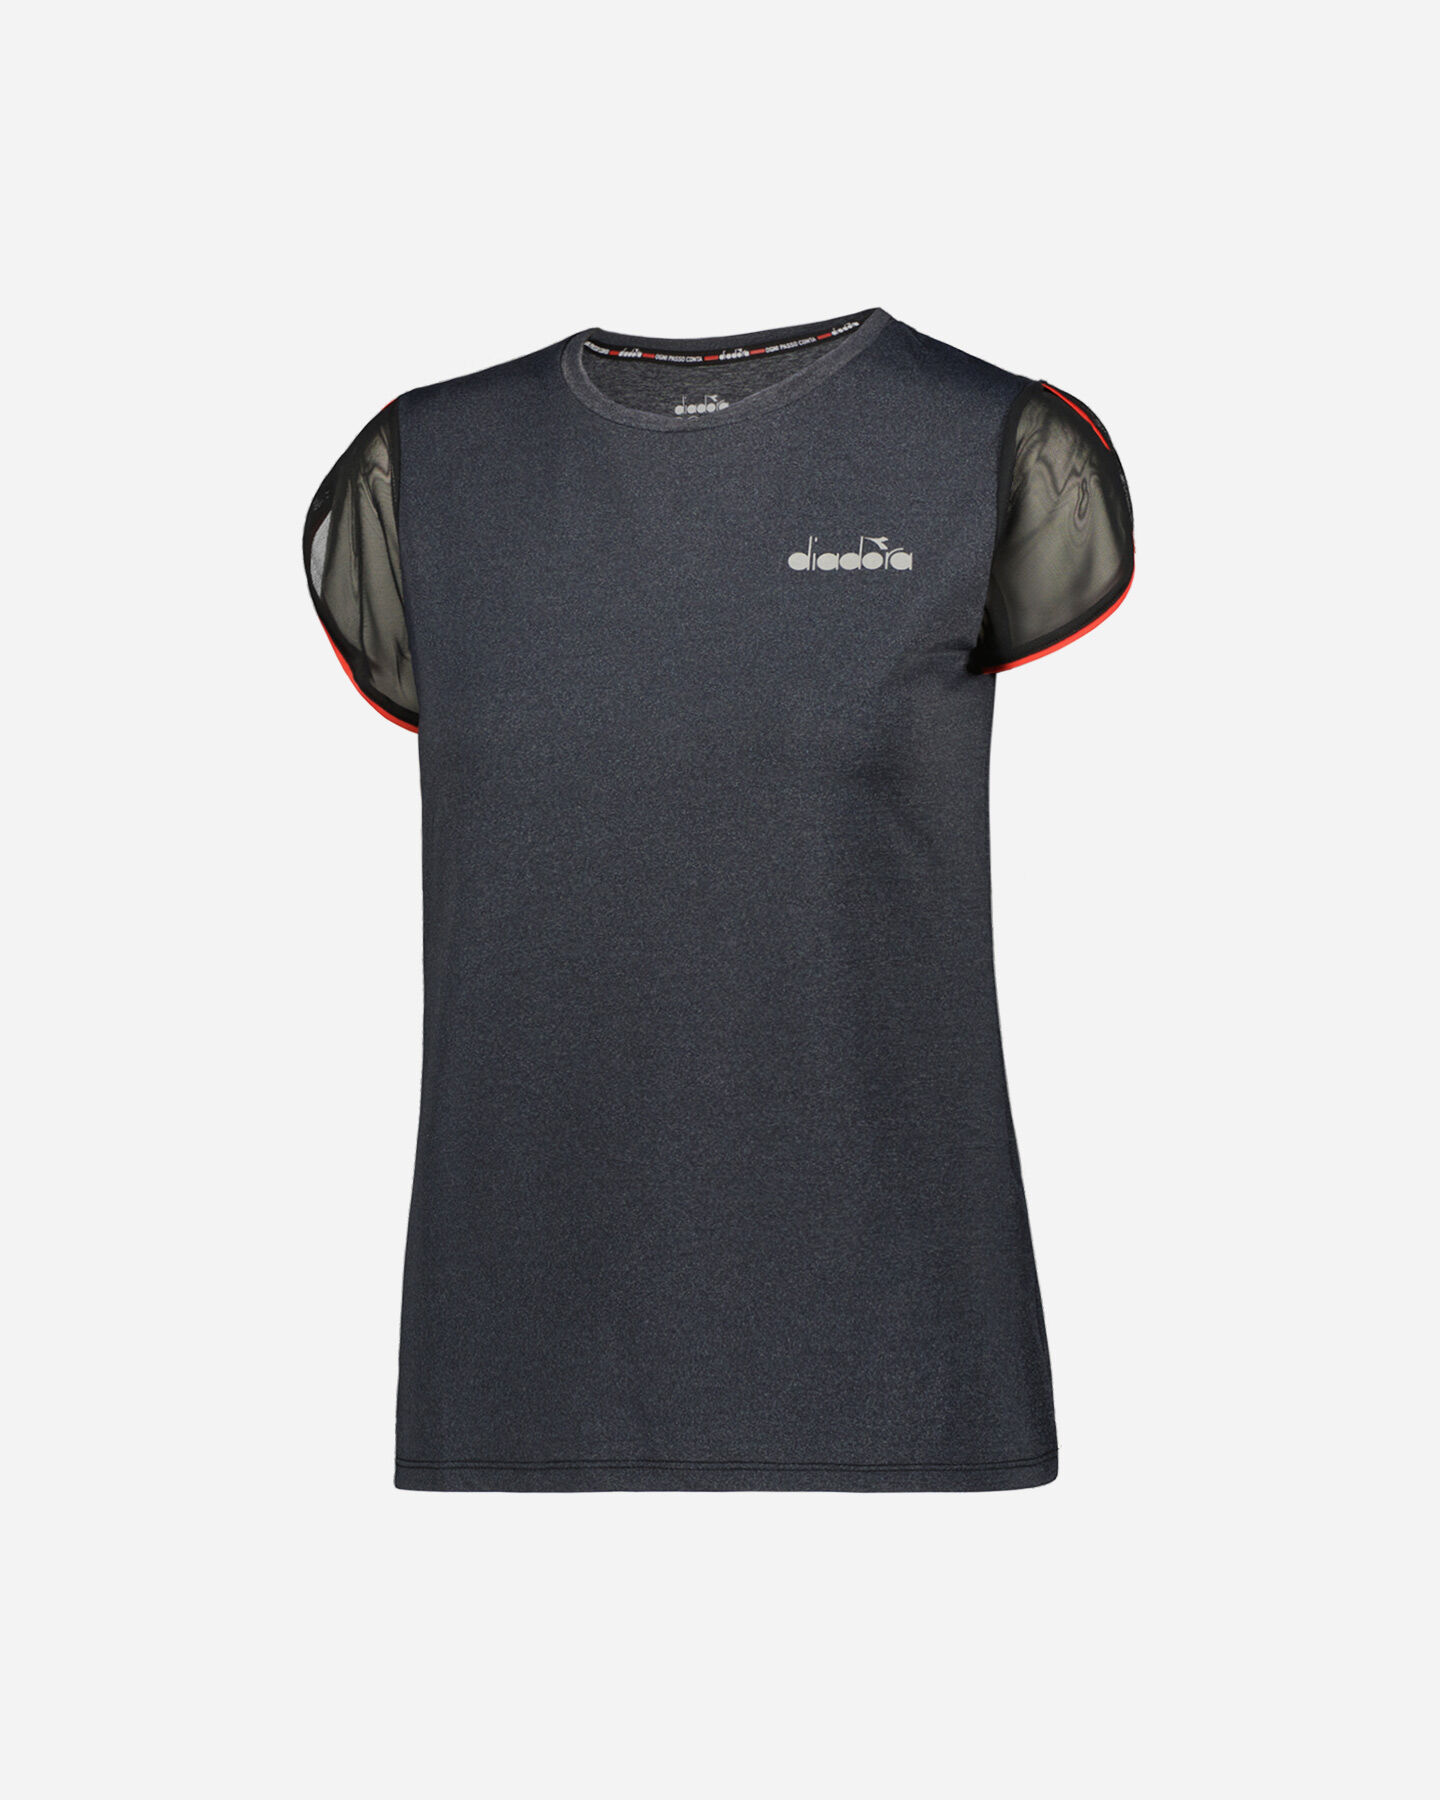  T-Shirt running DIADORA BE ONE W S5400809|80013|XS scatto 0